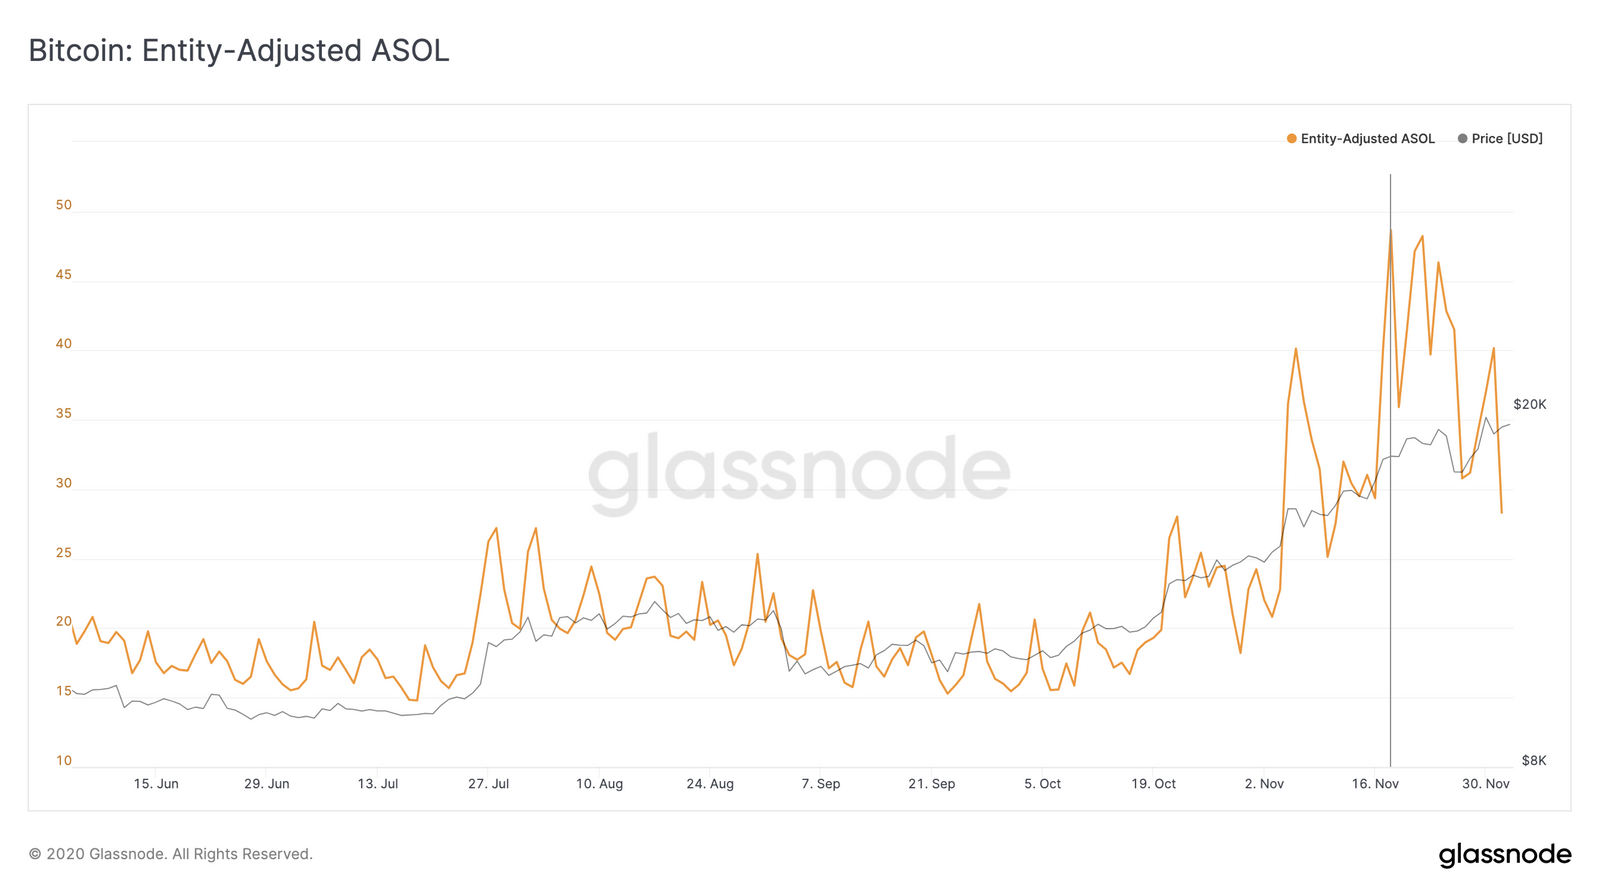 Bitcoin Entity-Adjusted ASOL at an all-time high